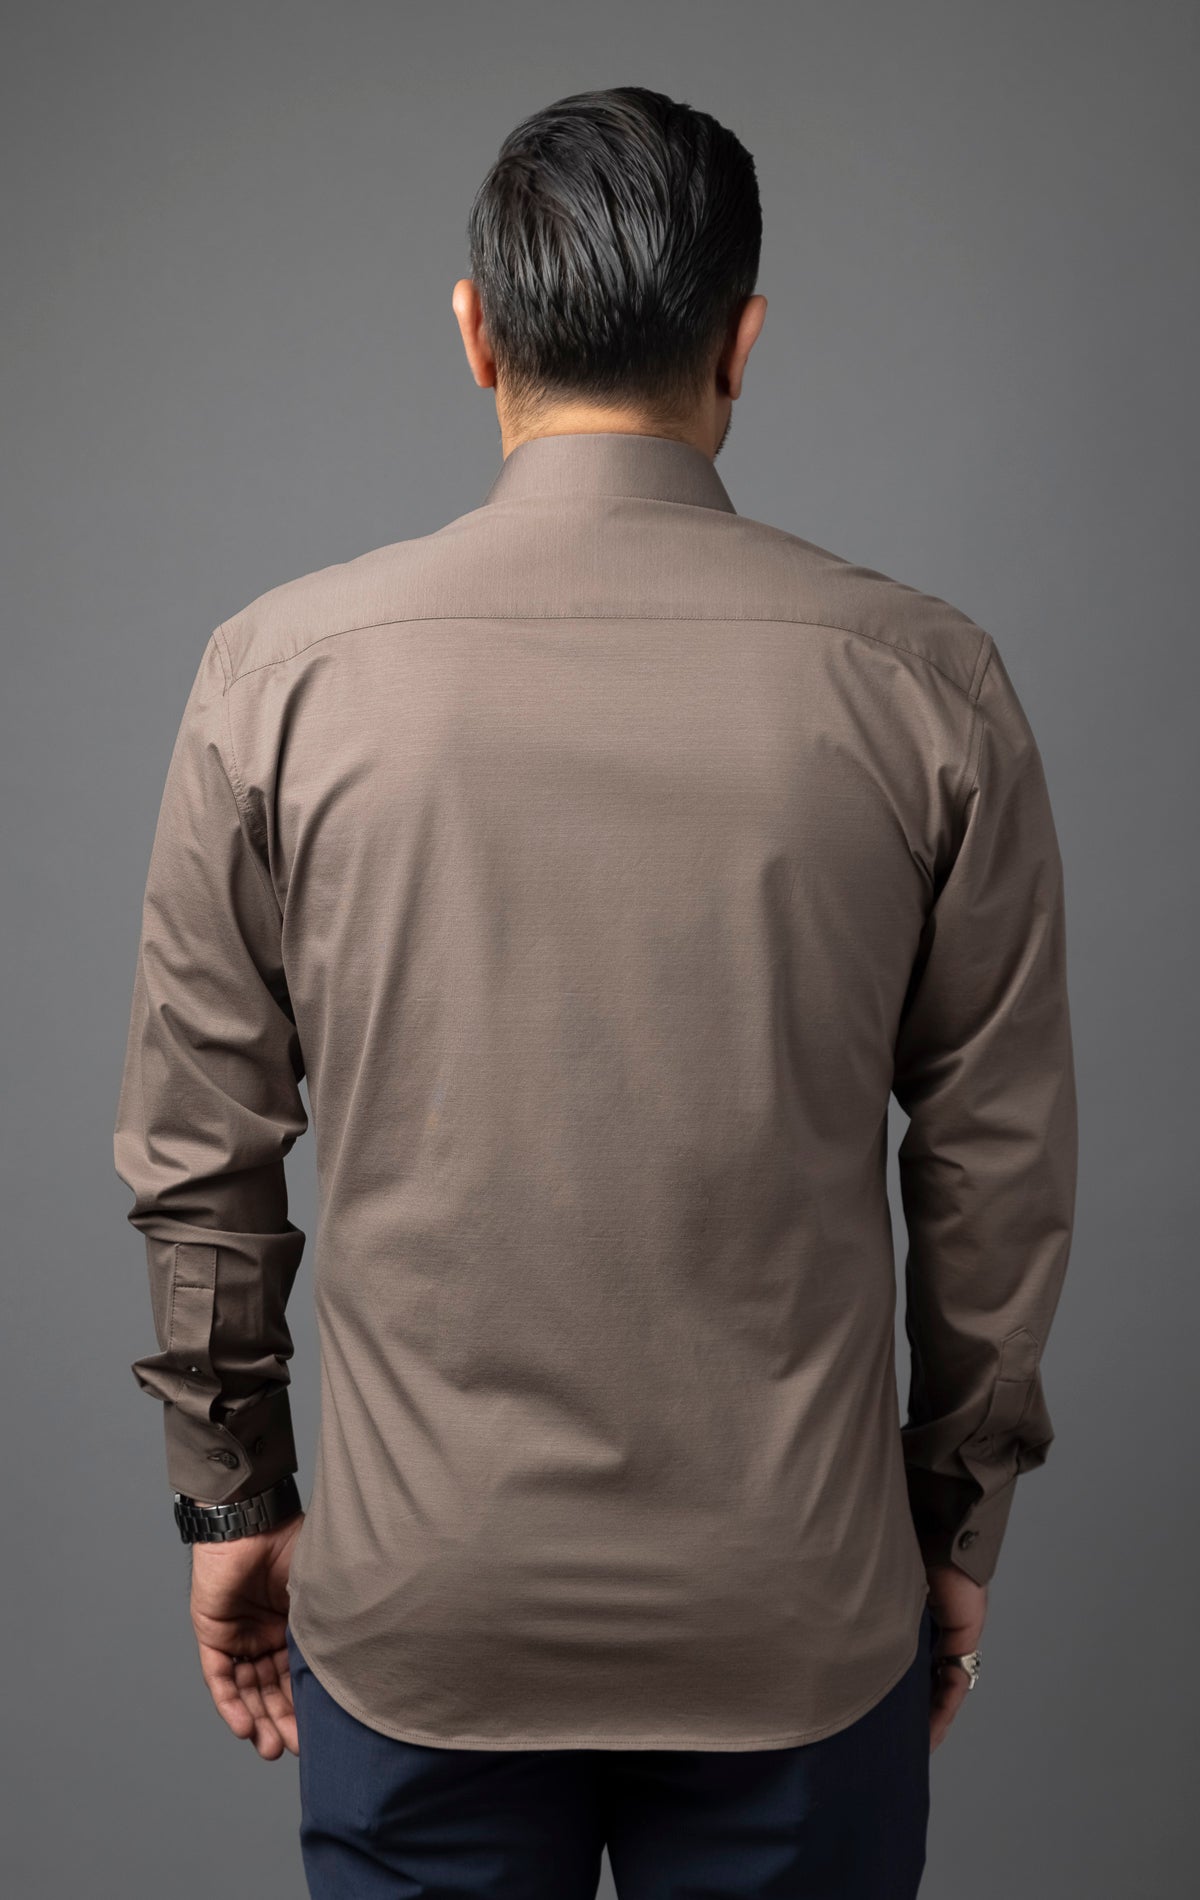 Men's long-sleeve formal shirt in a brown color. The shirt has a regular fit, point collar, and button fastening down the front.